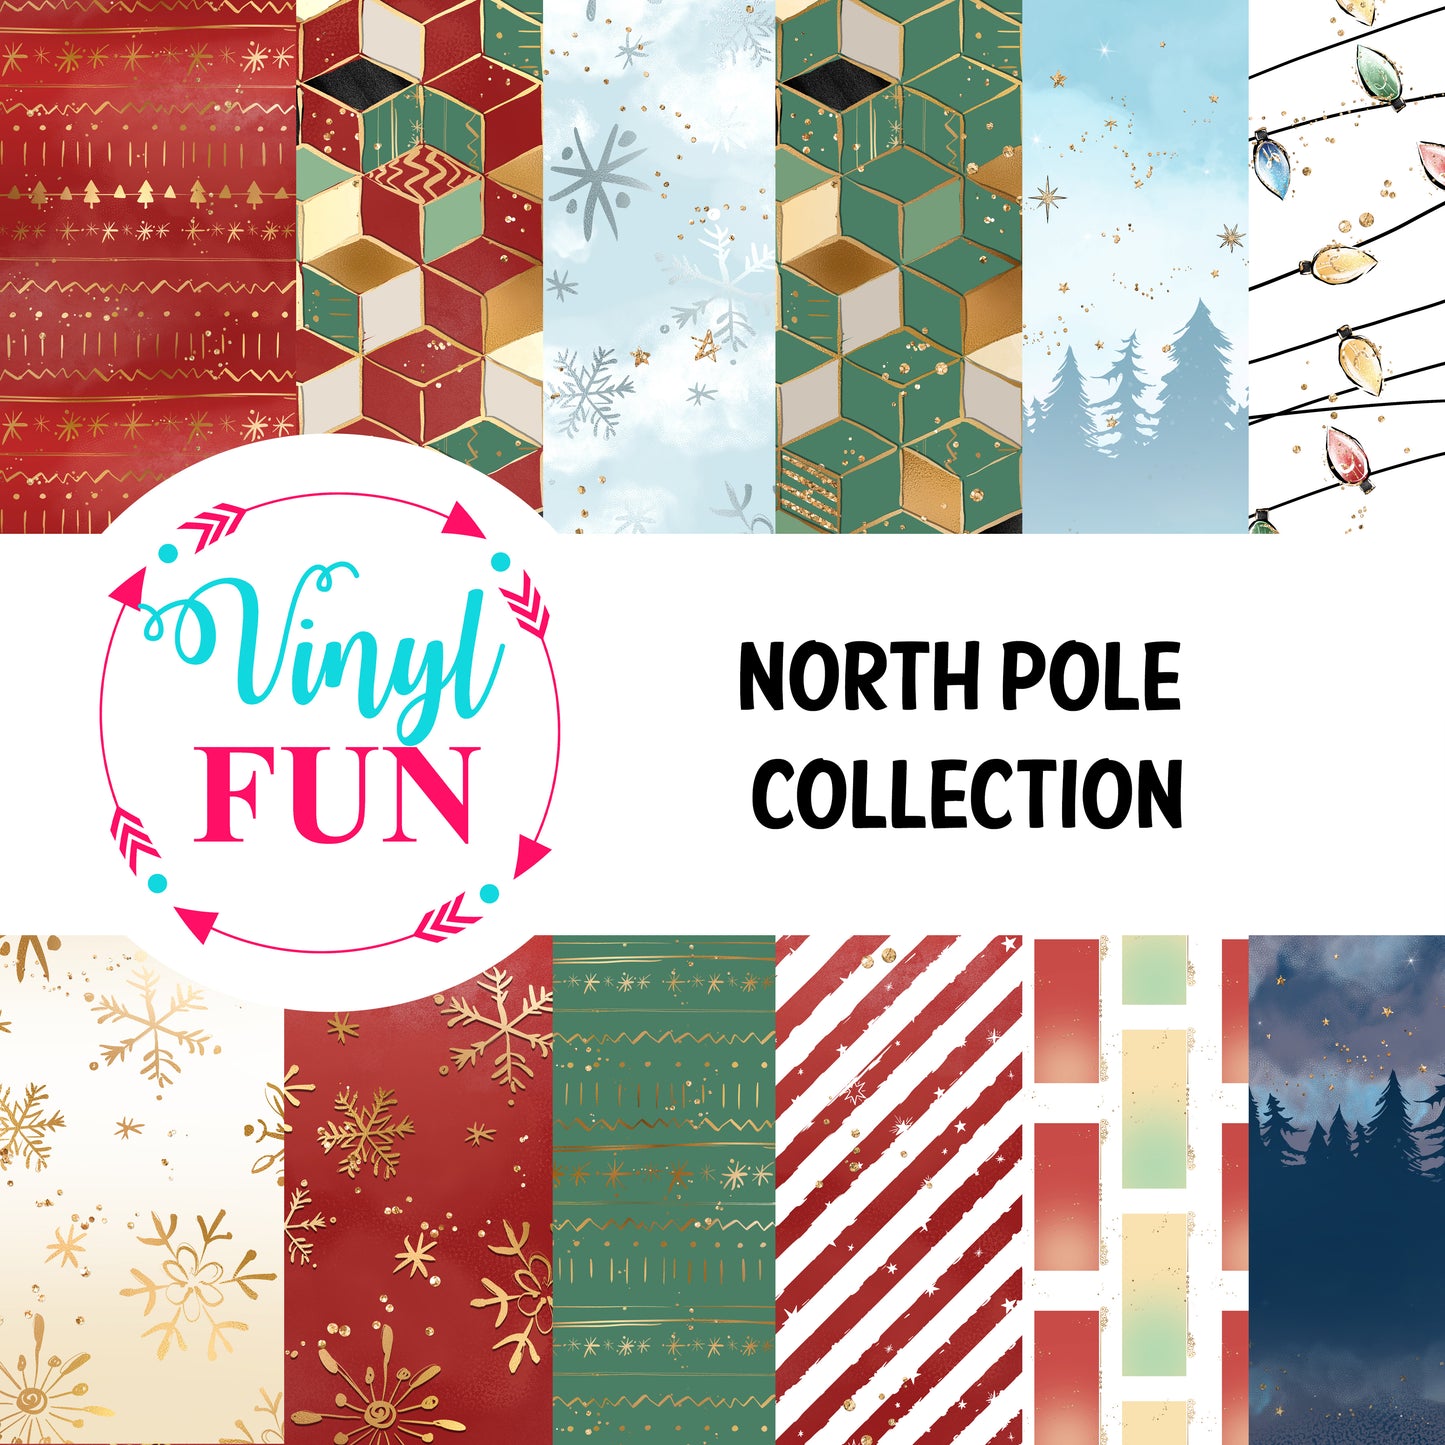 North Pole Collection